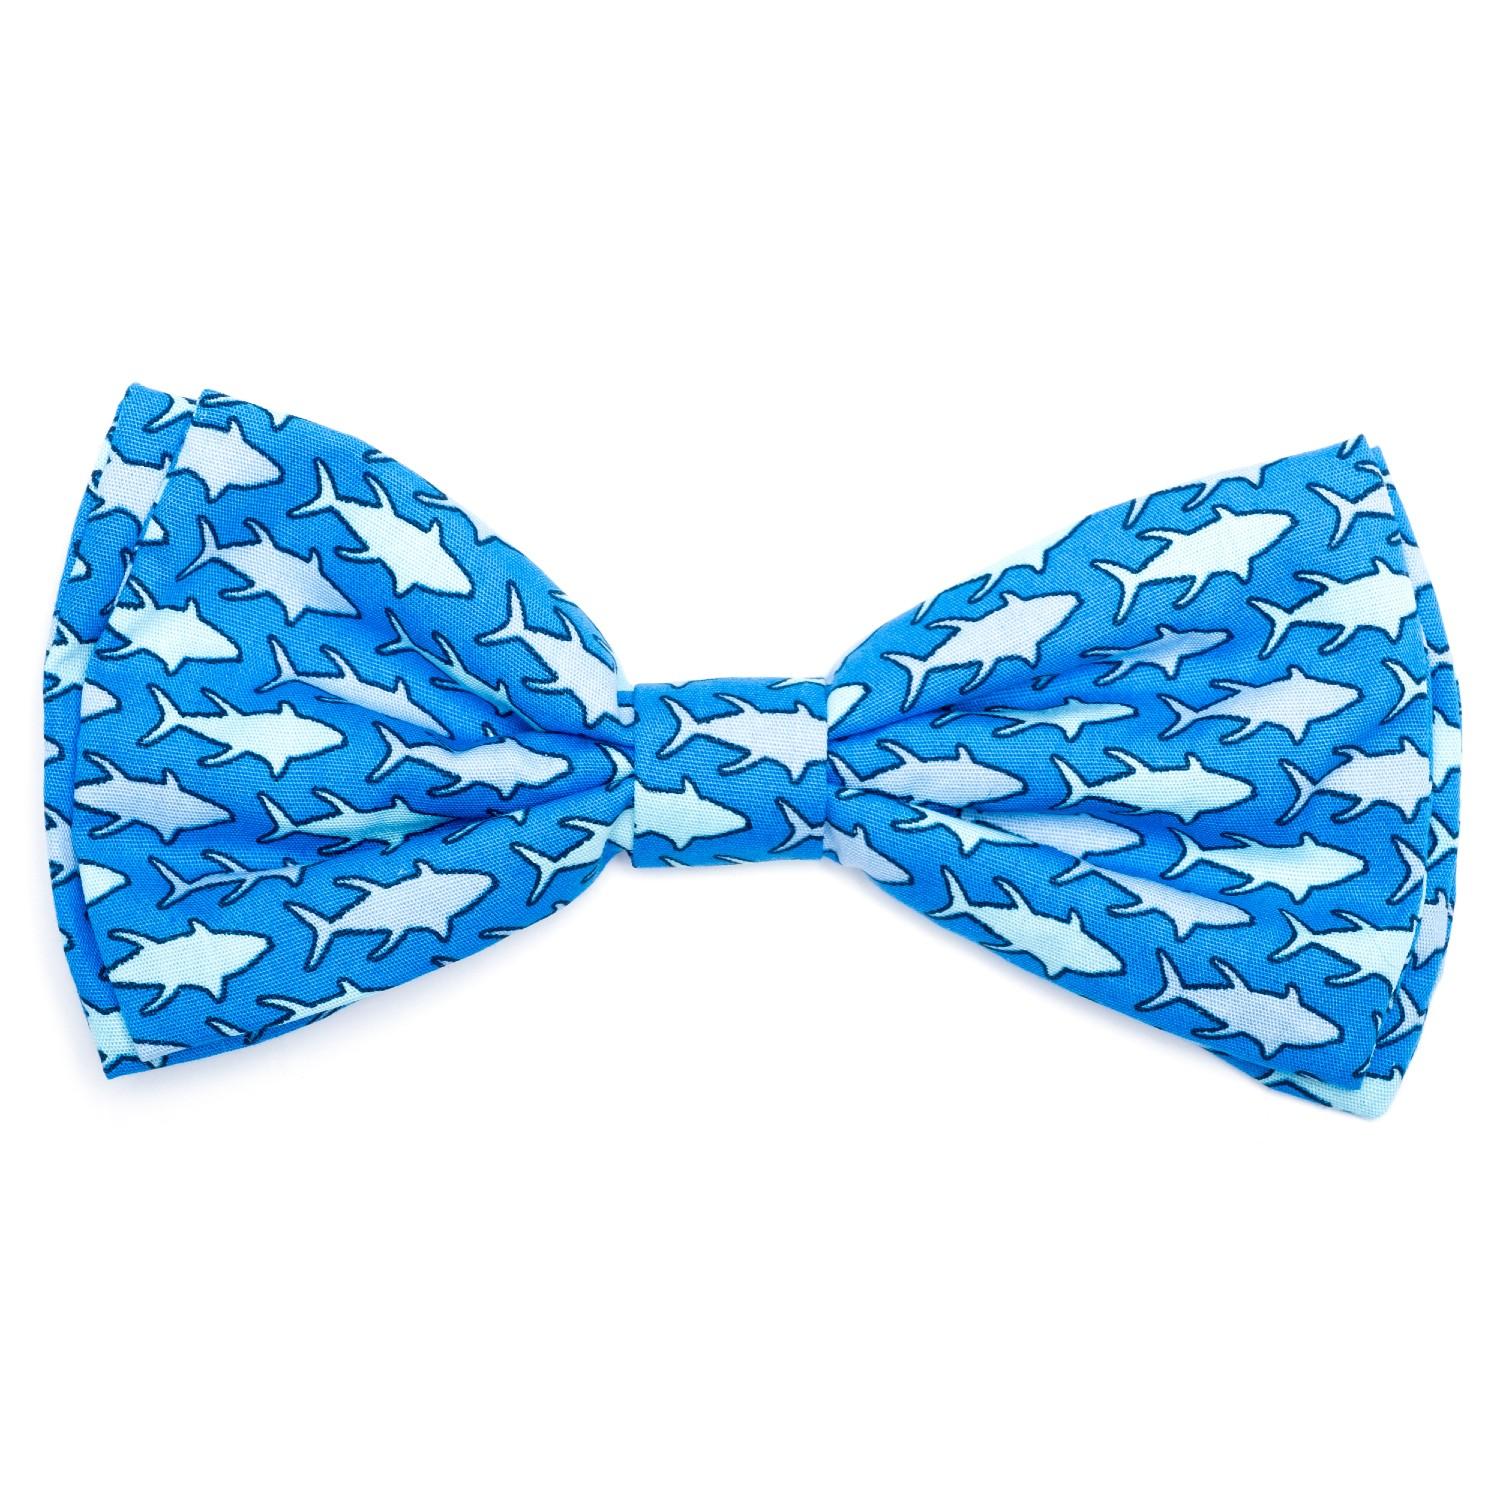 Worthy Dog Fishy Dog and Cat Bow Tie Collar Attachment